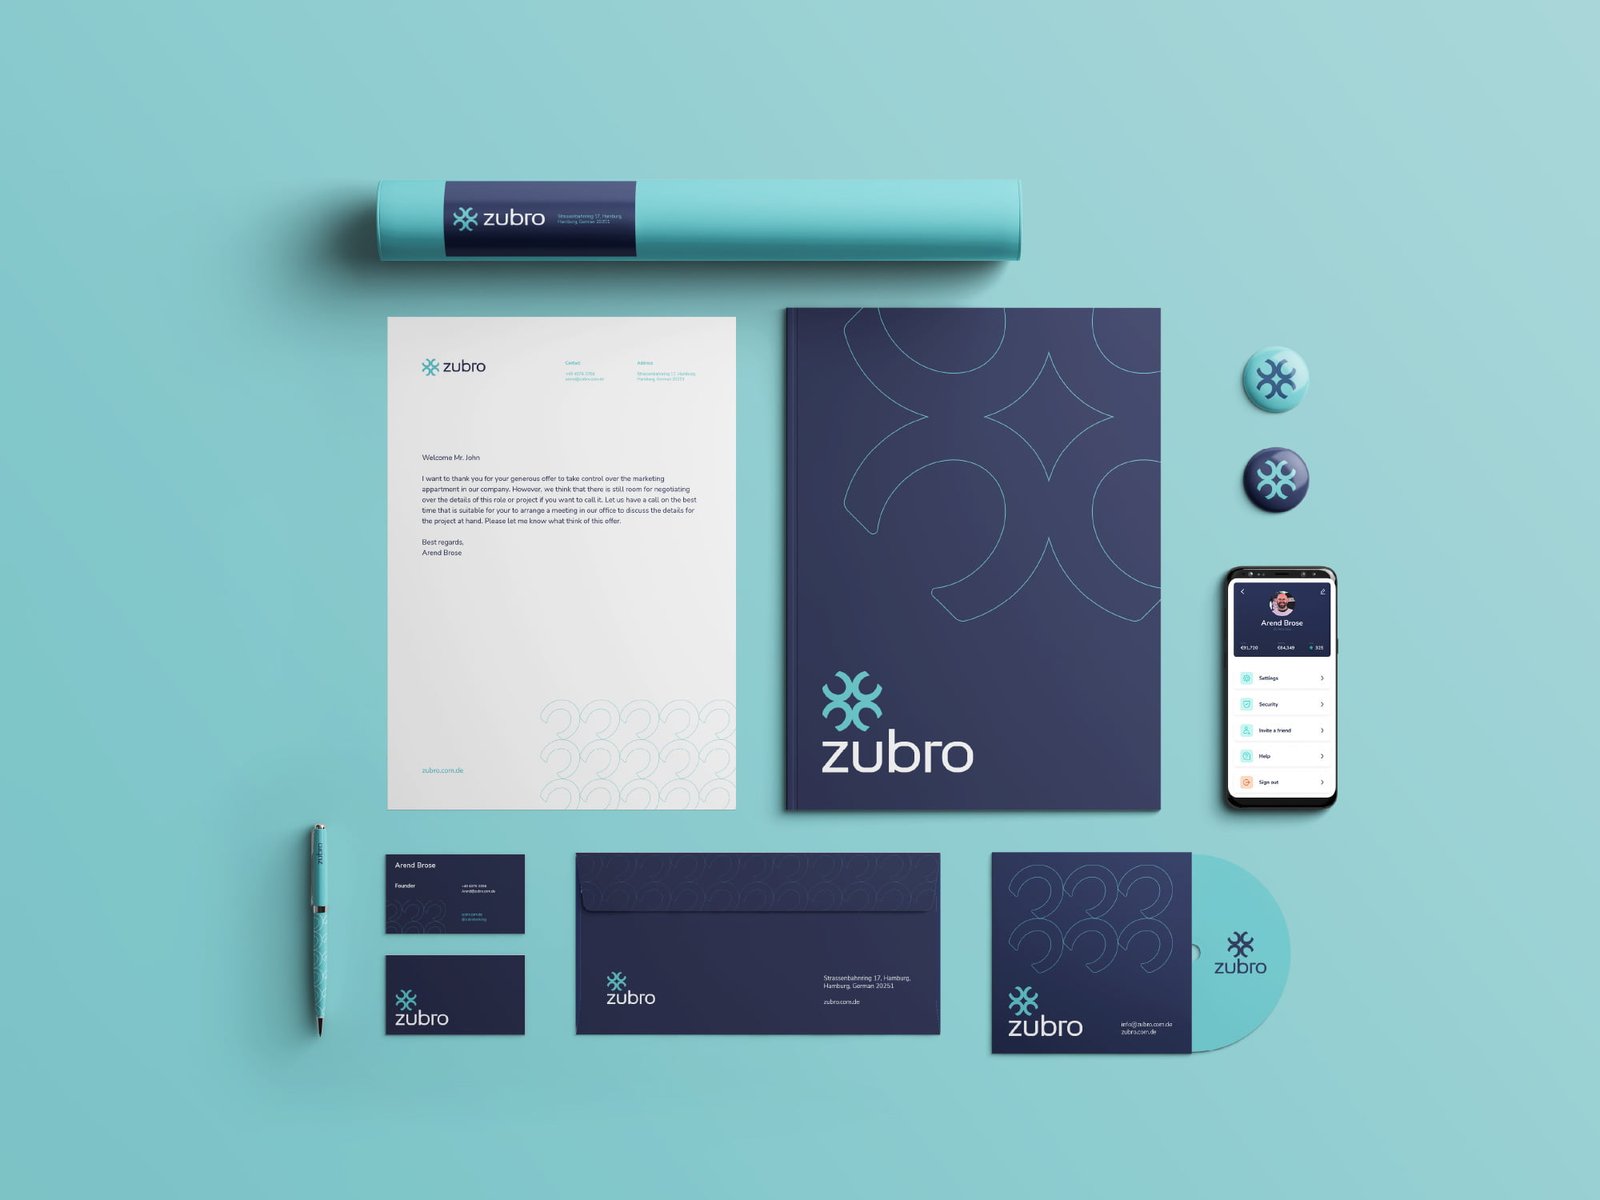 stationery design that includes letterhead, business card, envelope, pins, and cd.